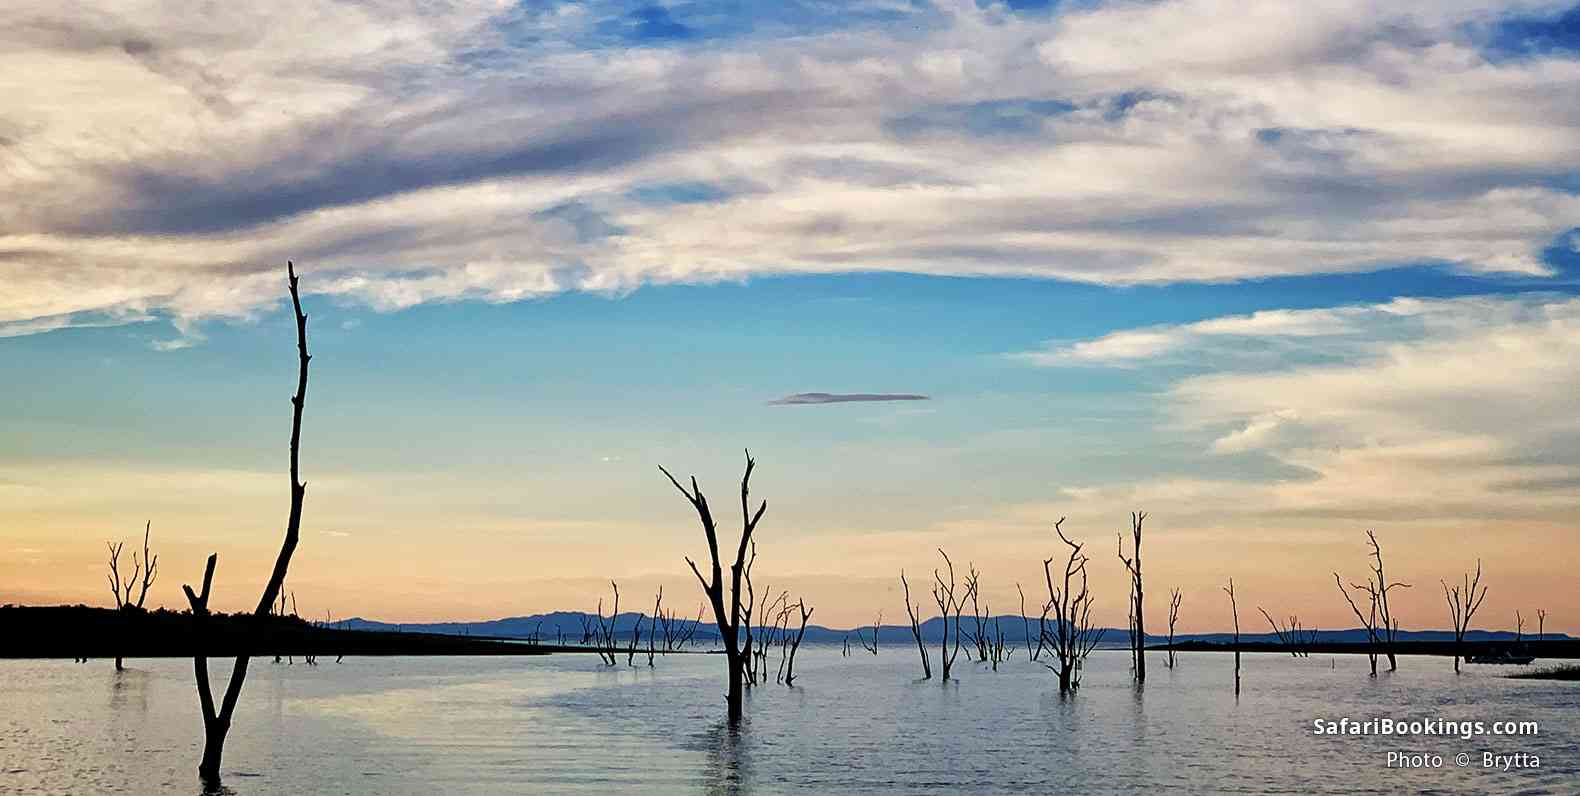 Dead trees standing in the man-made lake